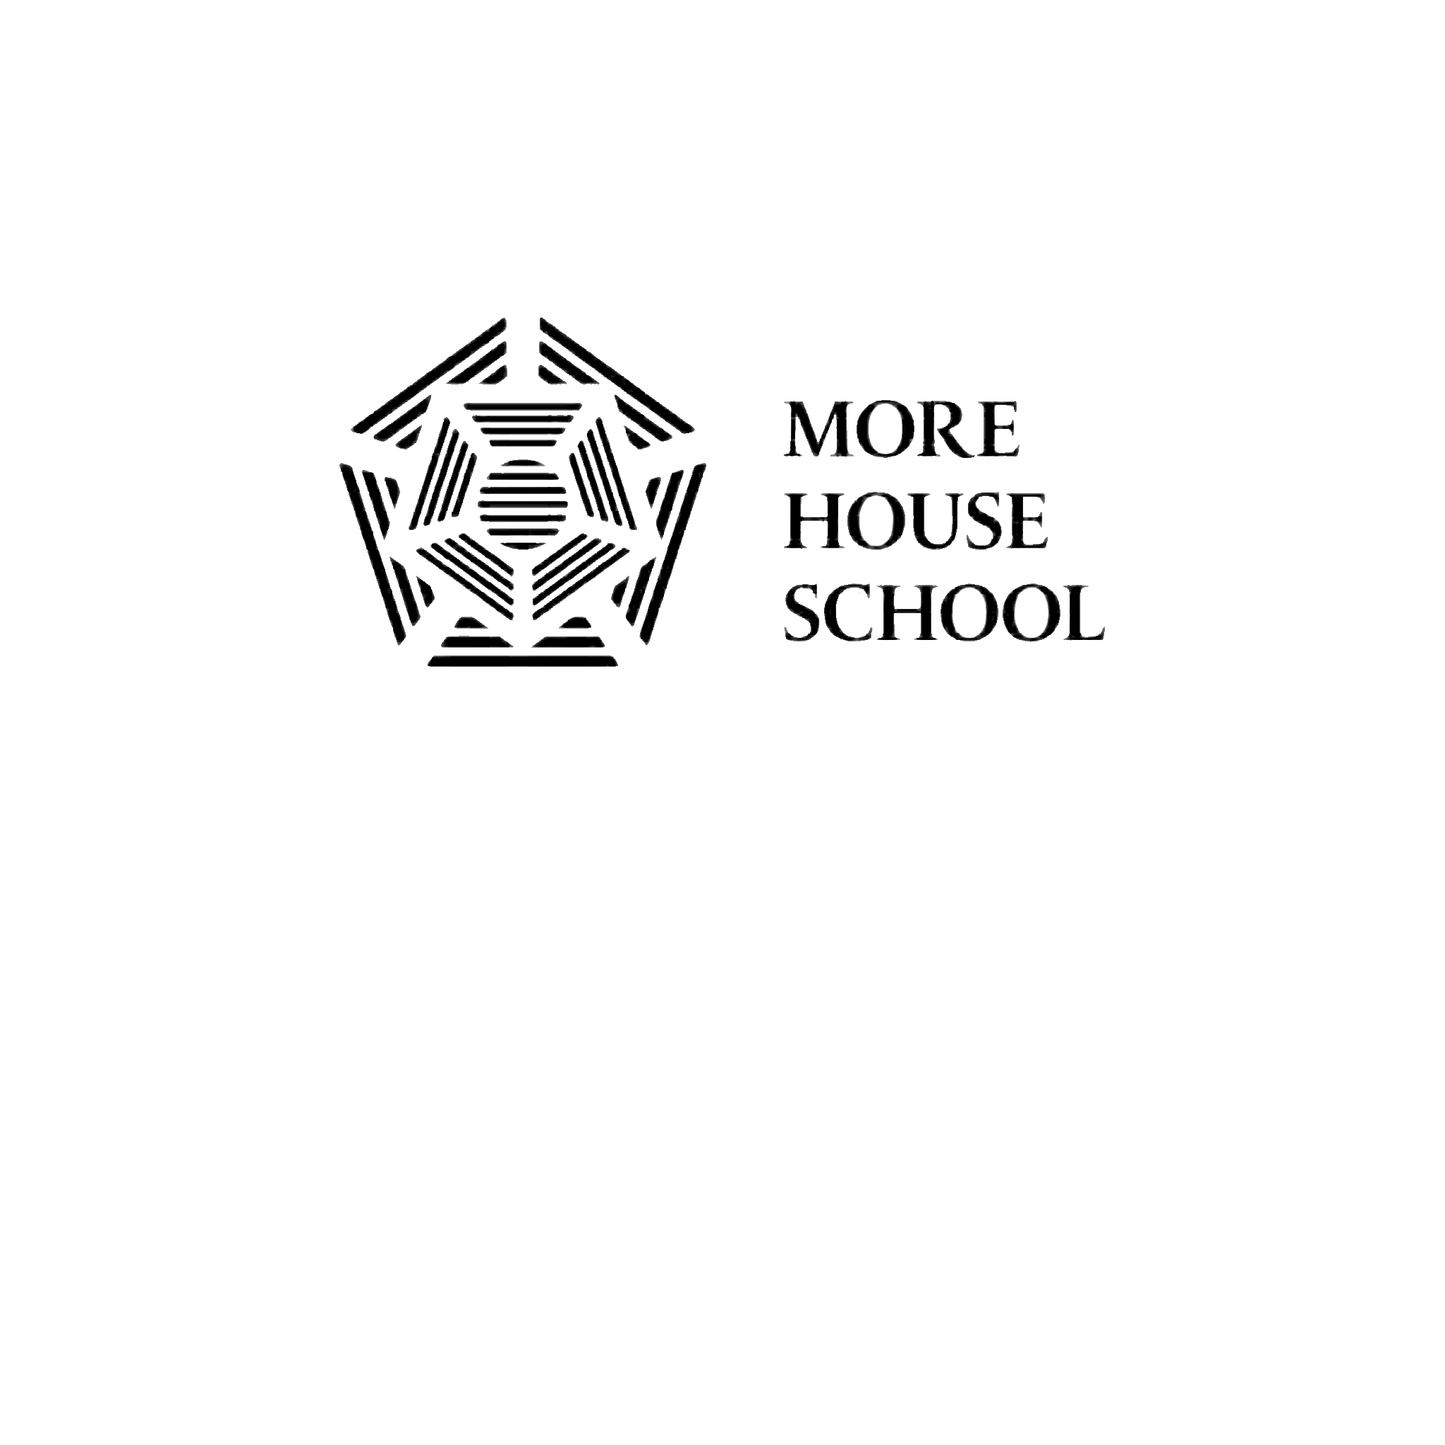 More House School: 11+ English (2014) [Version: Group 1]